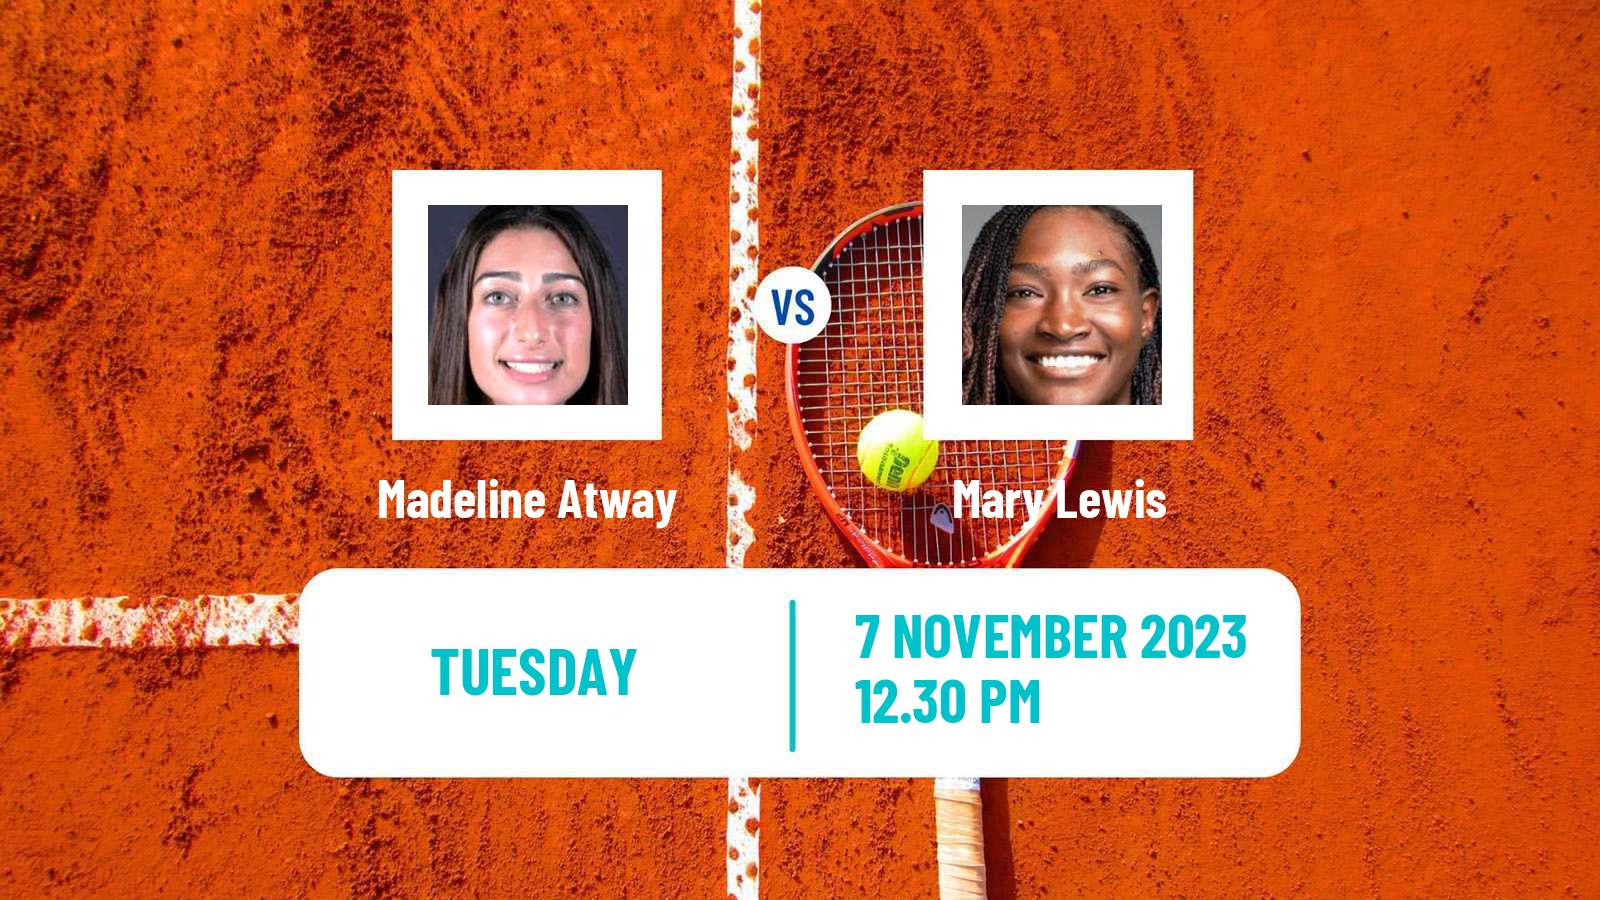 Tennis ITF W15 Champaign Il Women Madeline Atway - Mary Lewis